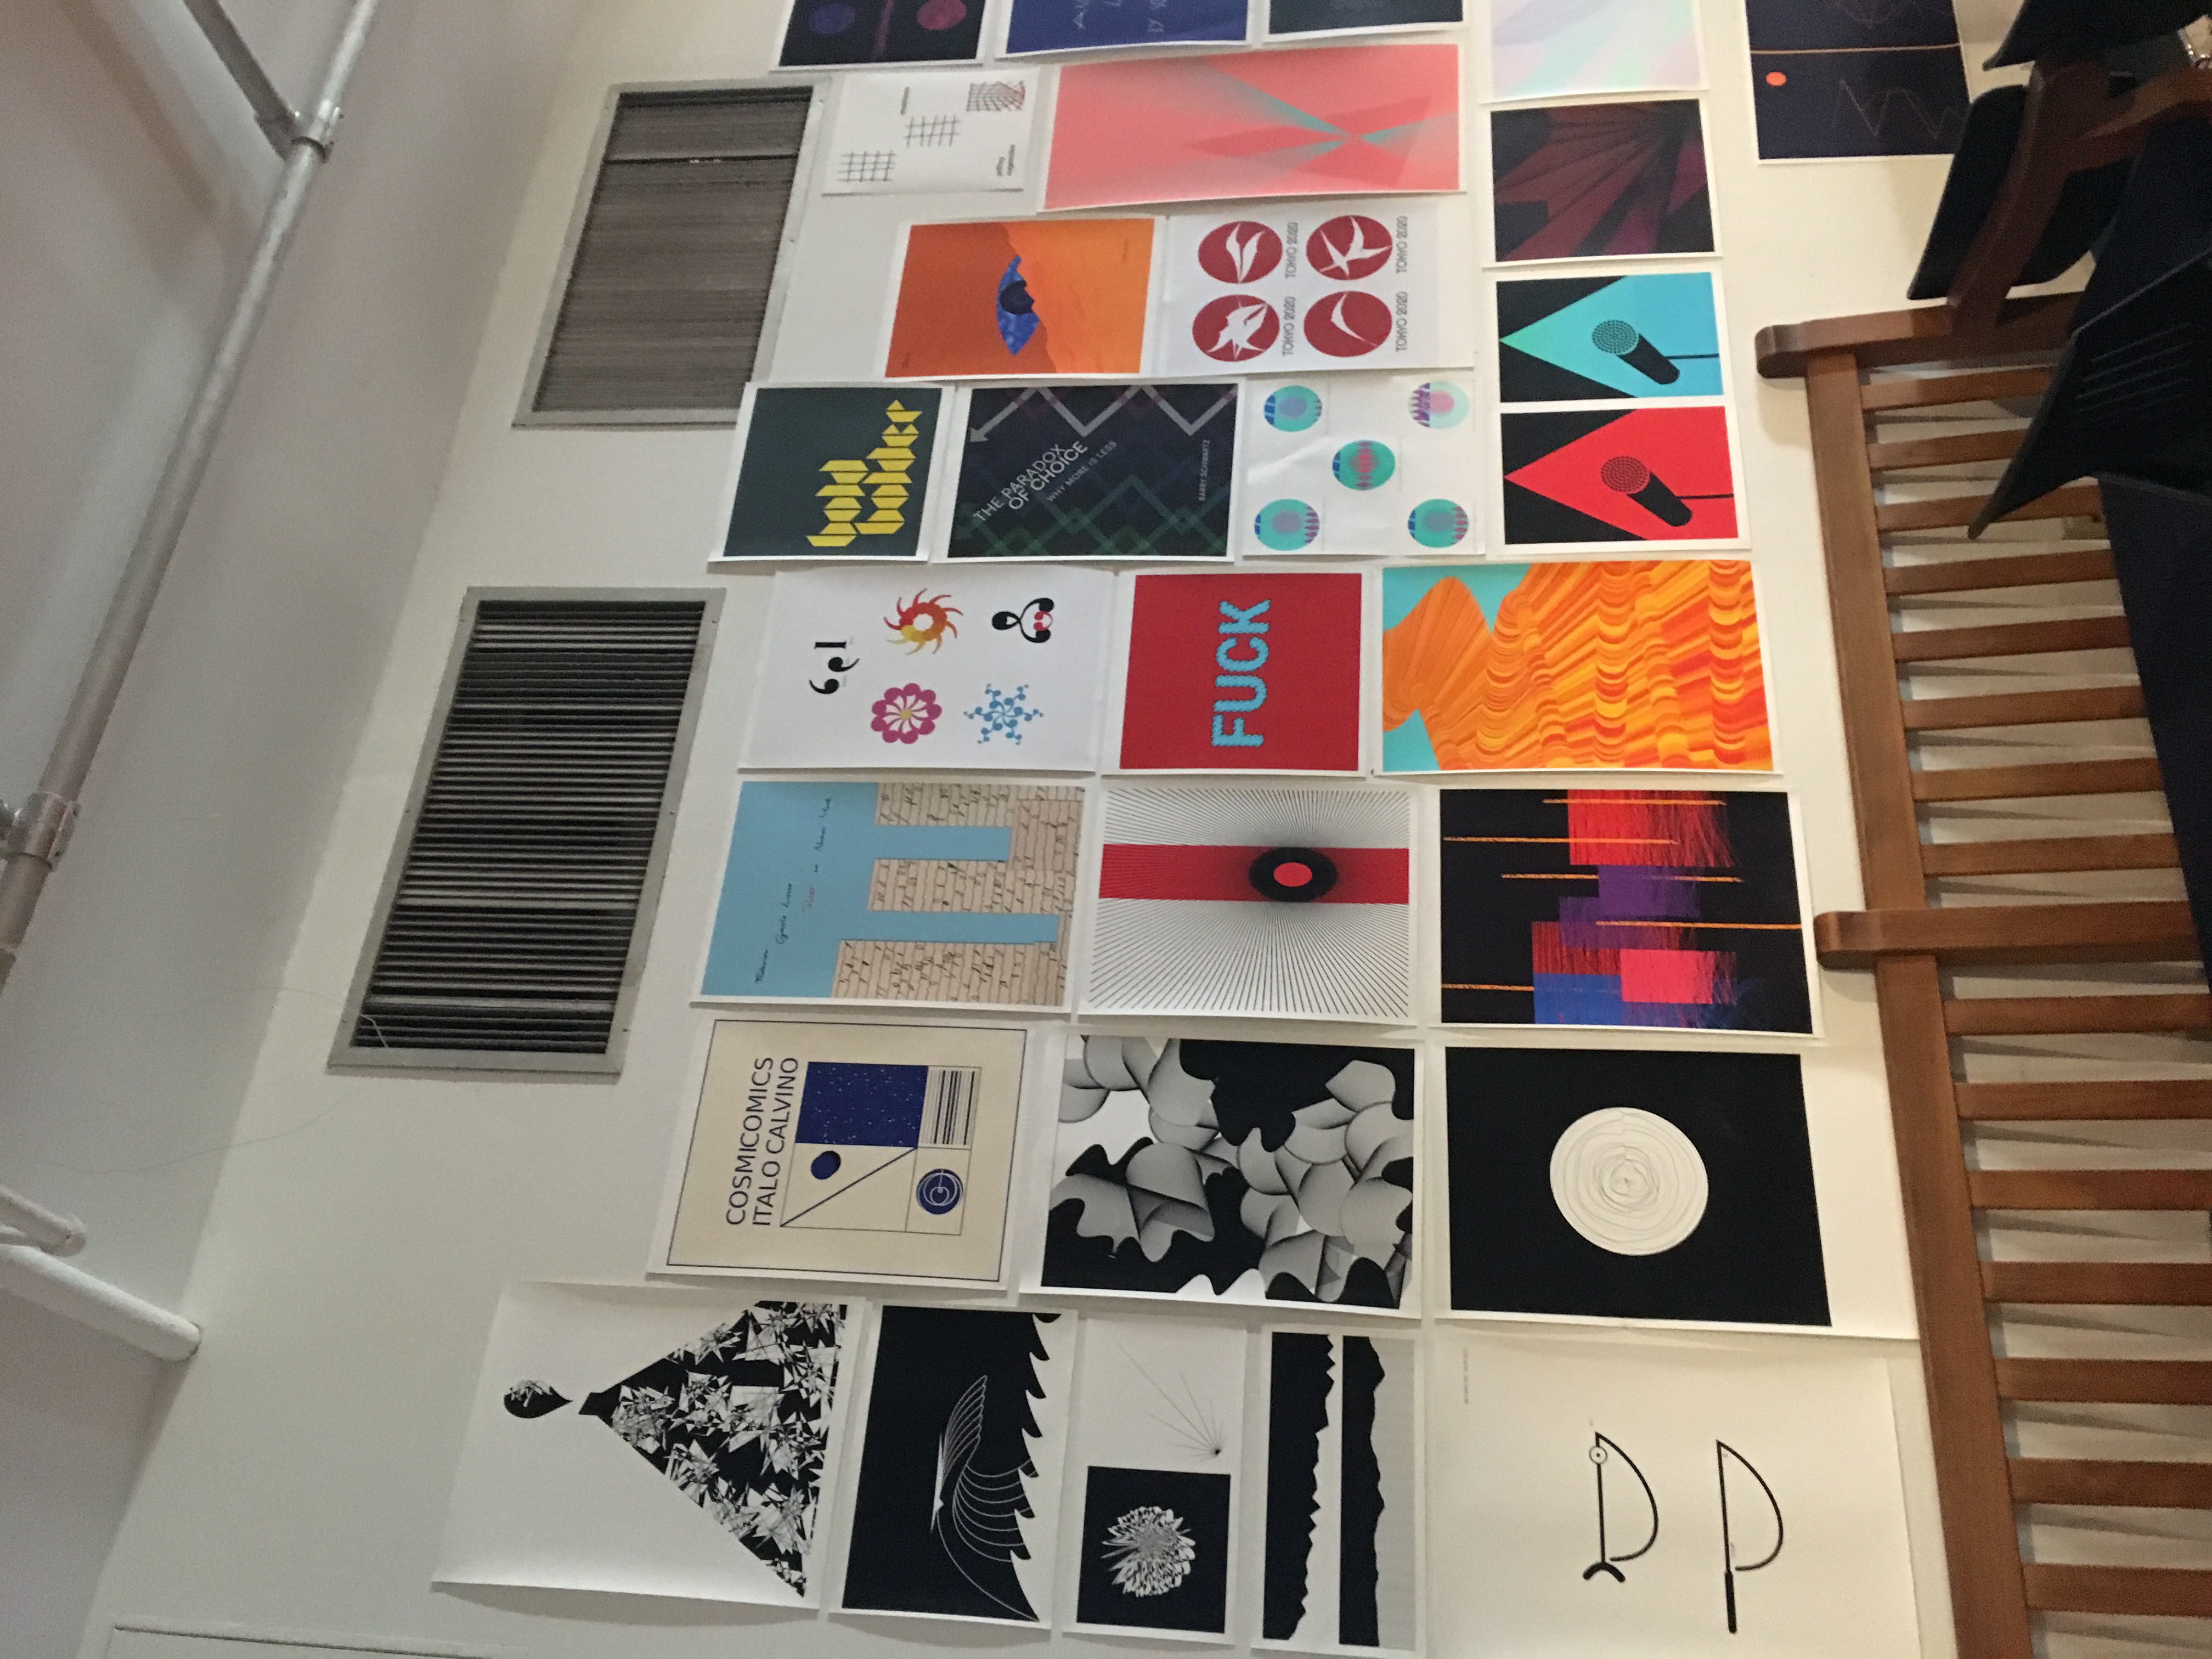 A curated wall of the collective works designed by the students of Rune Madsen's Programming Design Systems Class, highlighting the journey of graphic design through code.